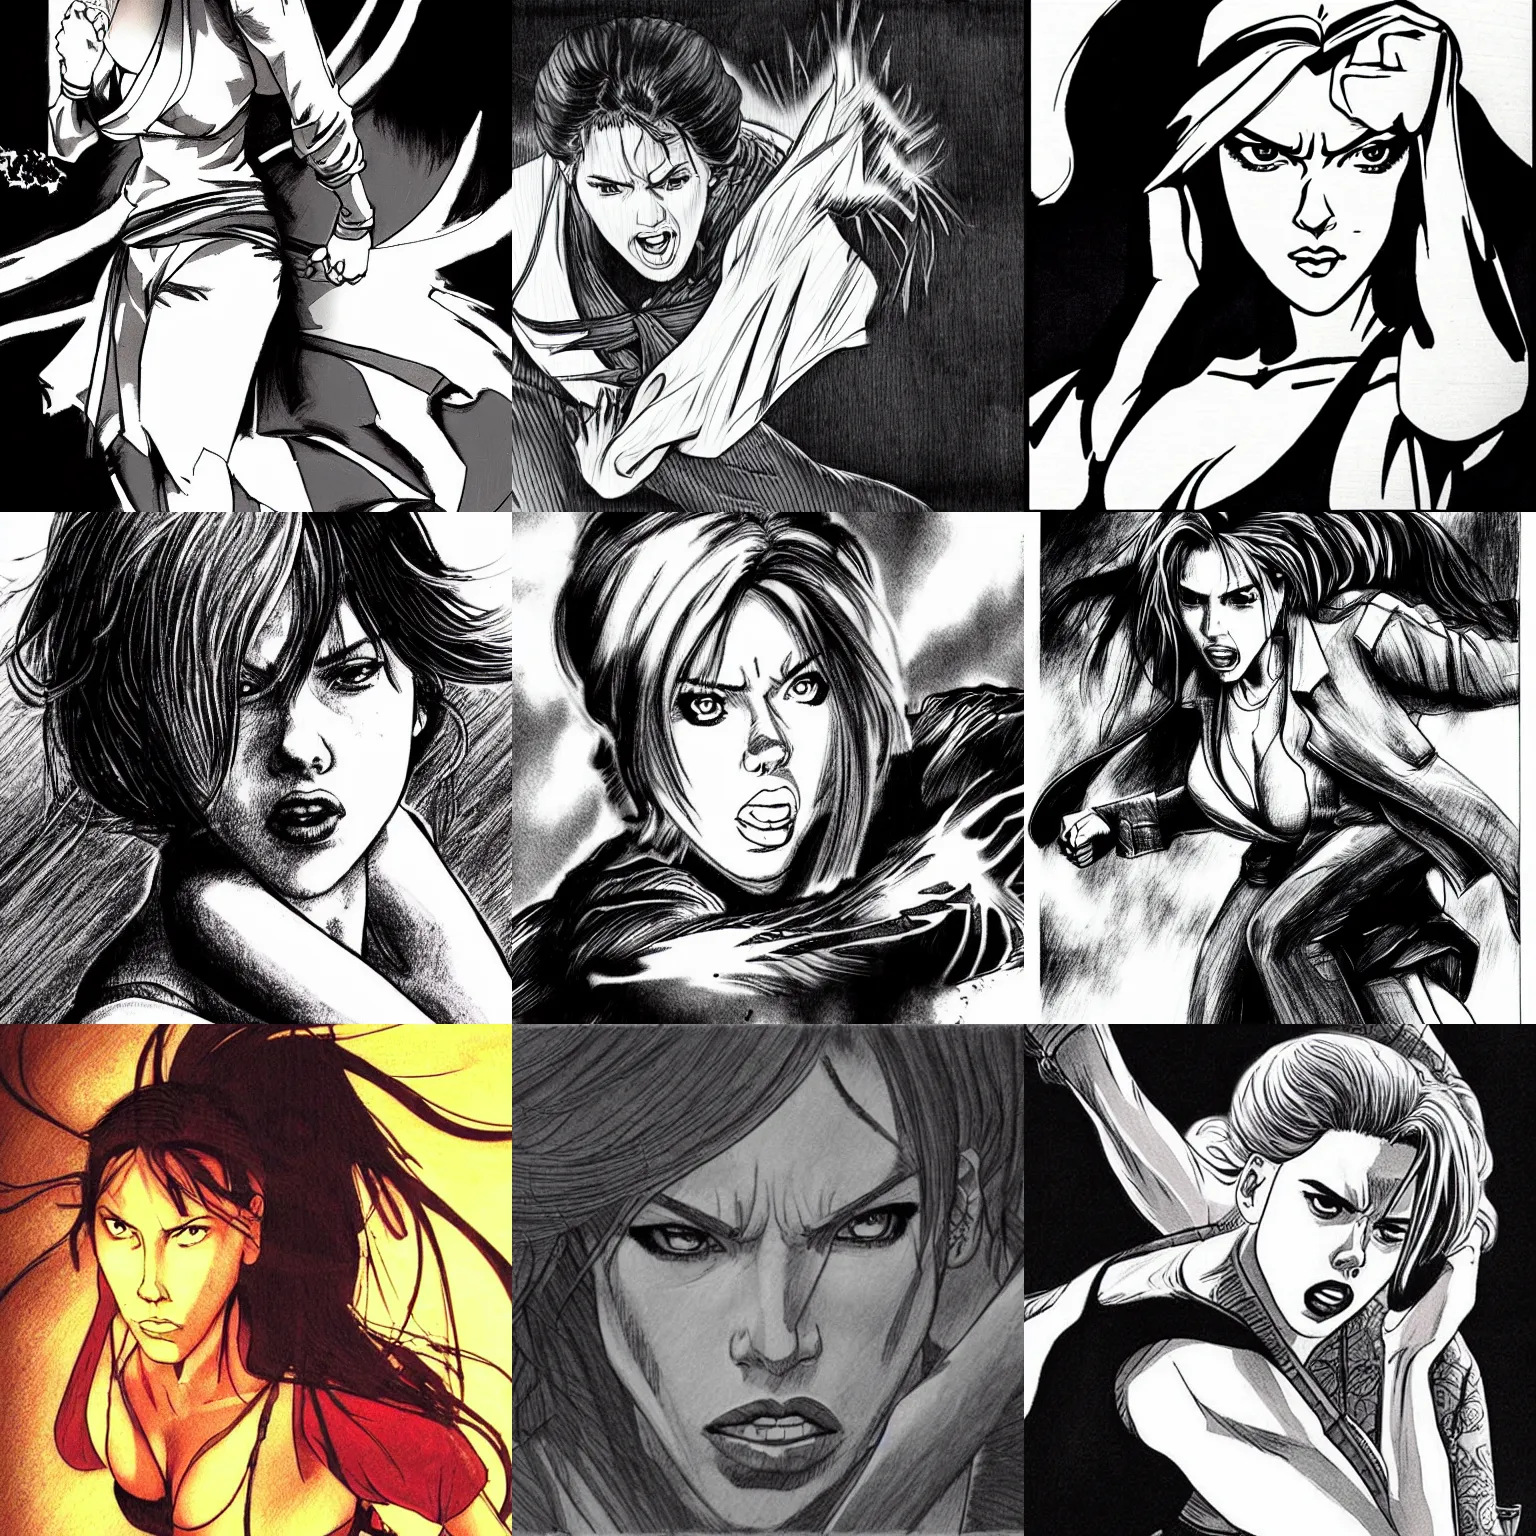 Prompt: scarlett johansson with angry expression judo throws halle berry. dramatic lighting, ninja scroll anime style, pencil and ink manga drawing